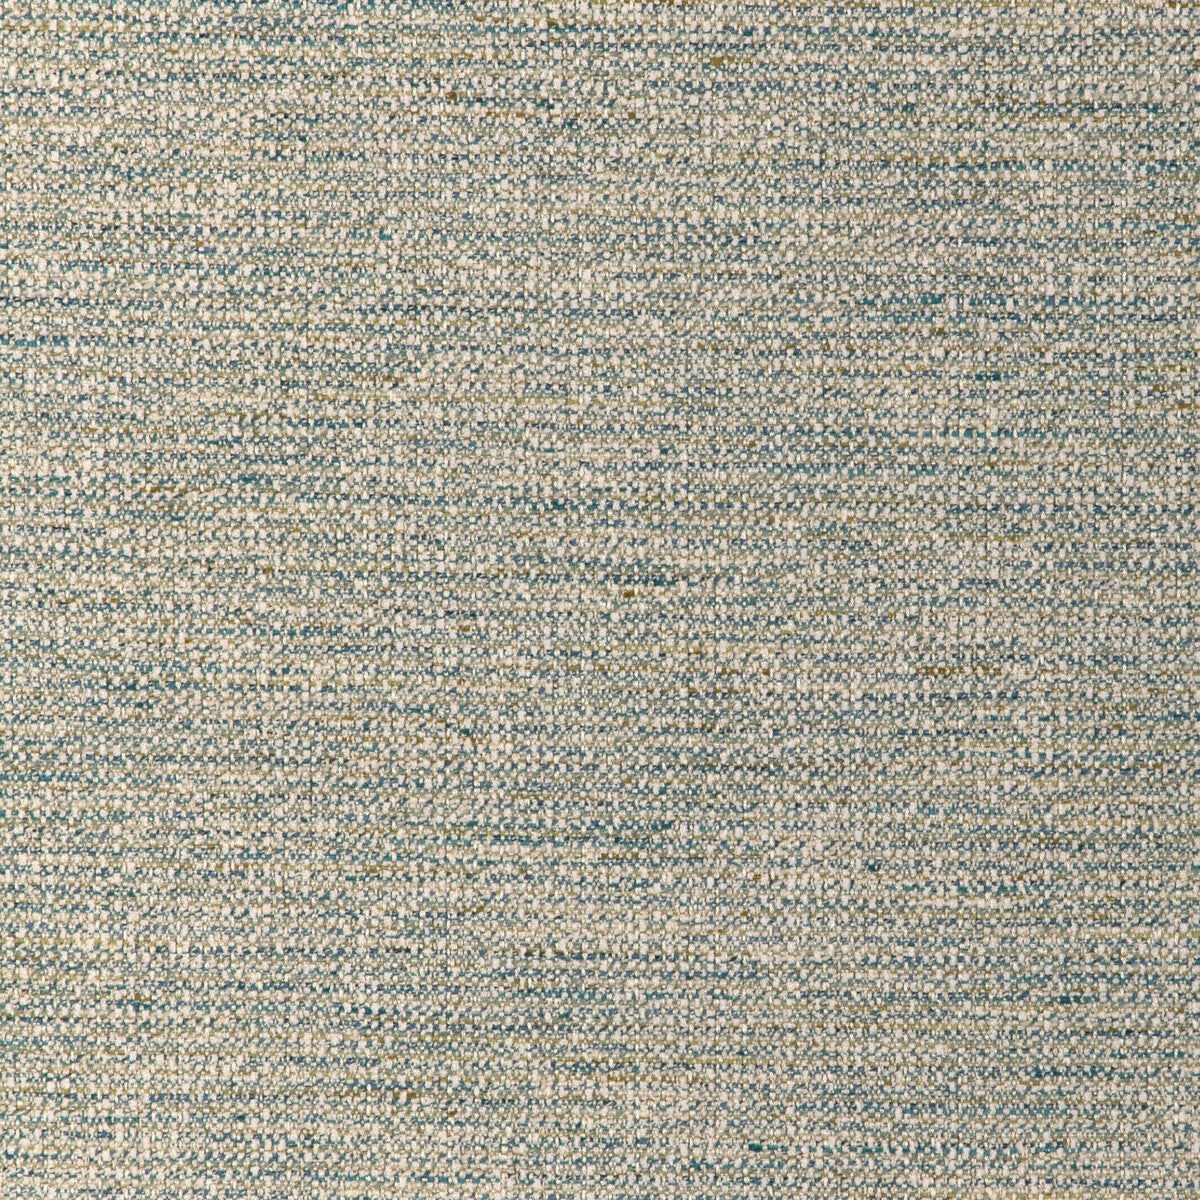 Kravet Design fabric in 37124-335 color - pattern 37124.335.0 - by Kravet Design in the Woven Colors collection